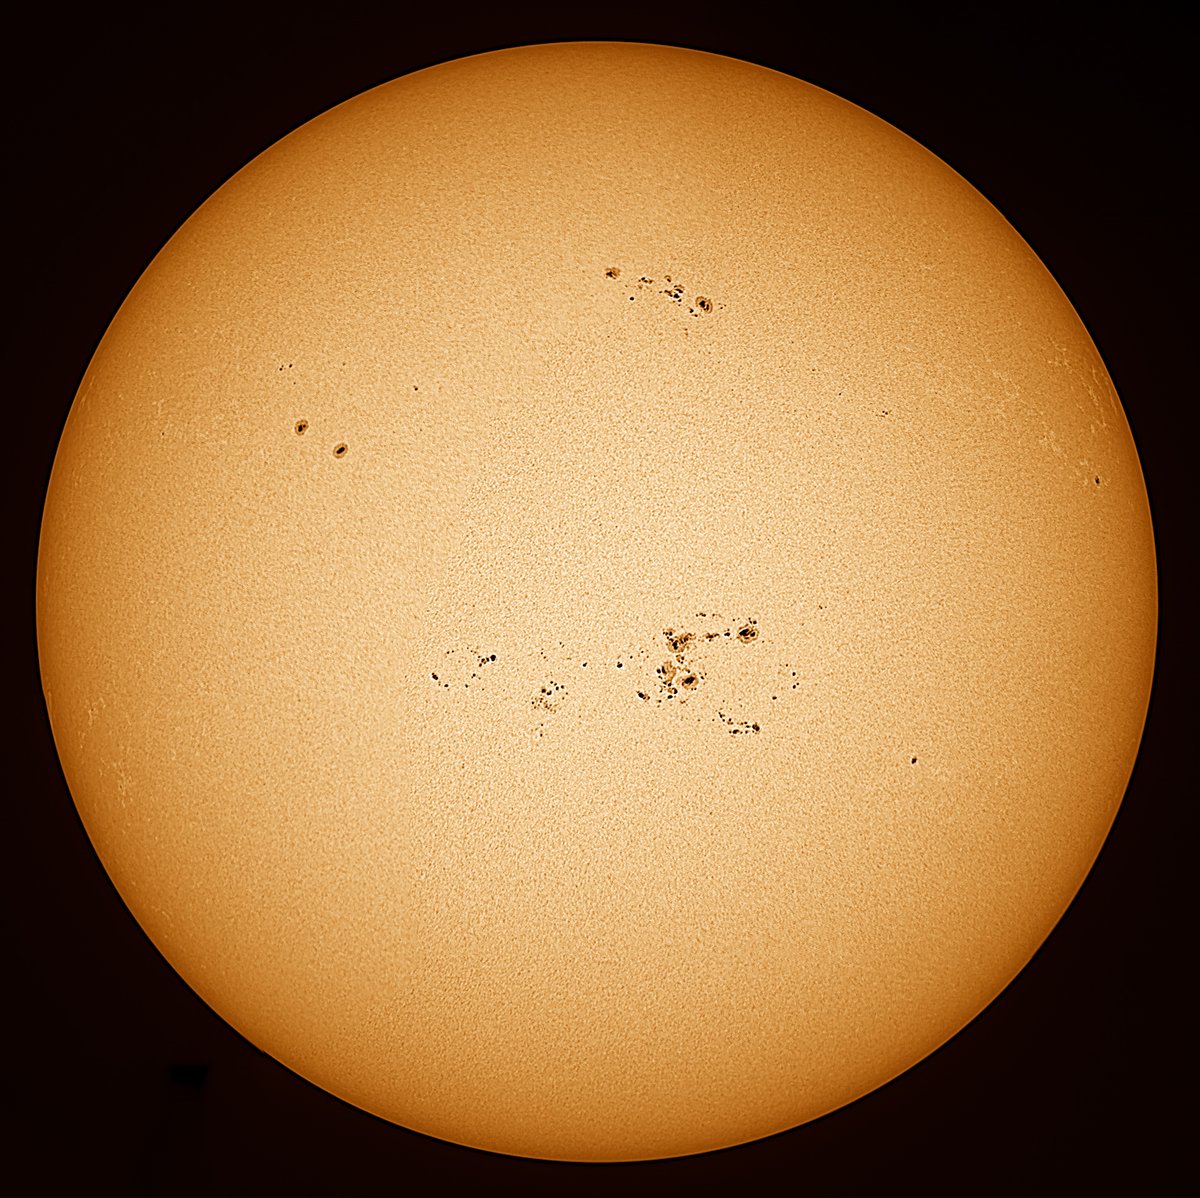 Make hay while the sun shines!! Detail Sun today. 5 panel mosaic 1400mm ASI432mm camera, white light Kendrick solar filter, C8 x.7 reducer. Worth a zoom 'click'! #sun #solar #sunspots #sunhour #stormhour #thephotohour #astrophotography #astronomy